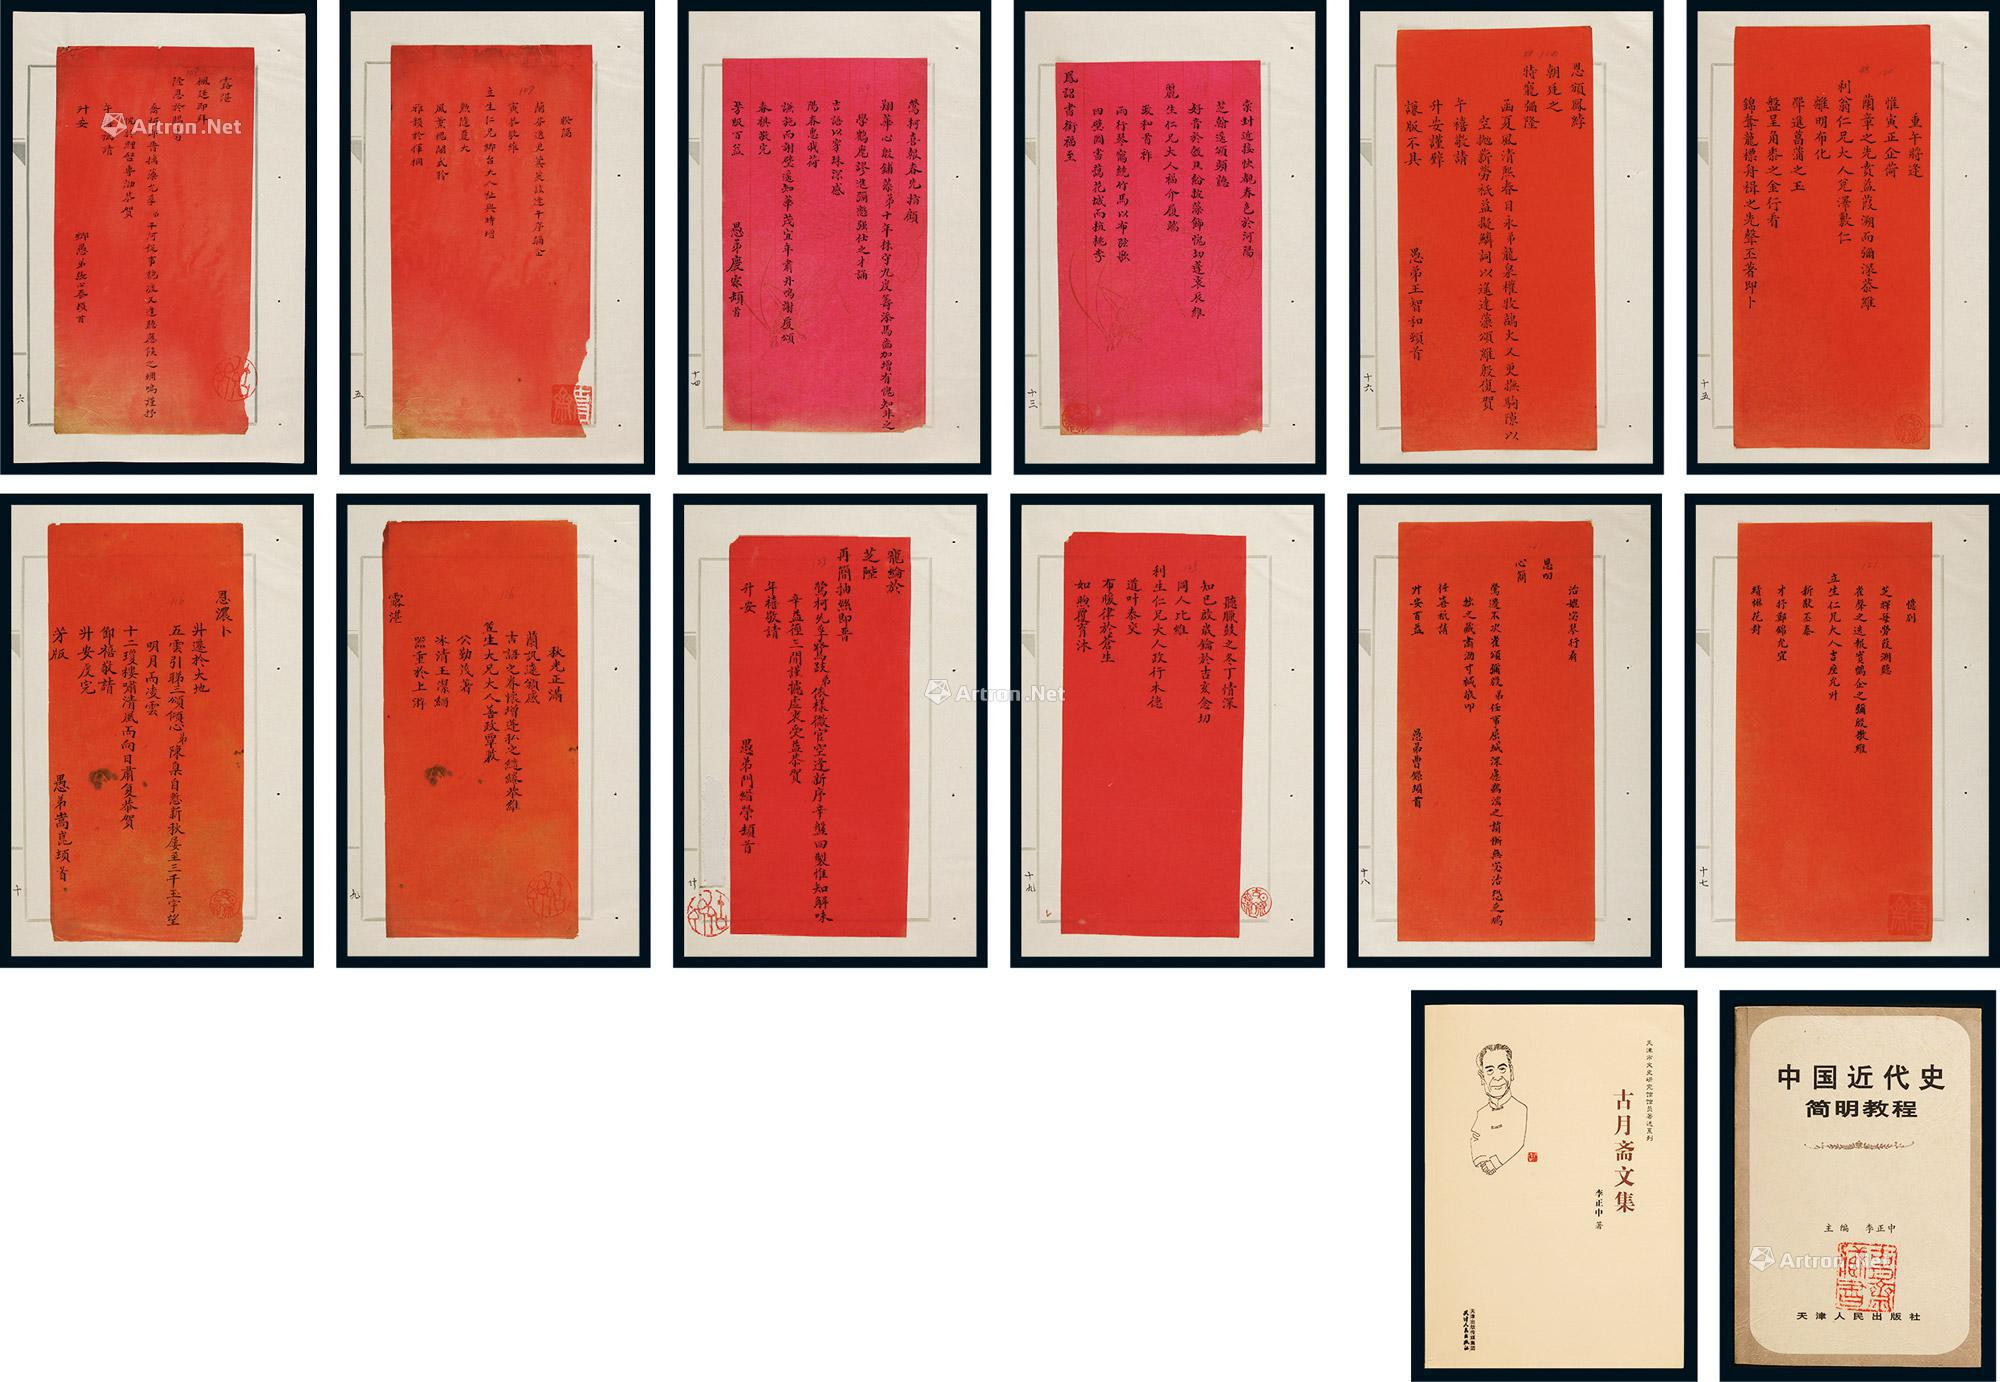 Six letters of 12 pages by Zhang Xintai, Qing Lin, Song Kun, with 2 volumes of library materials